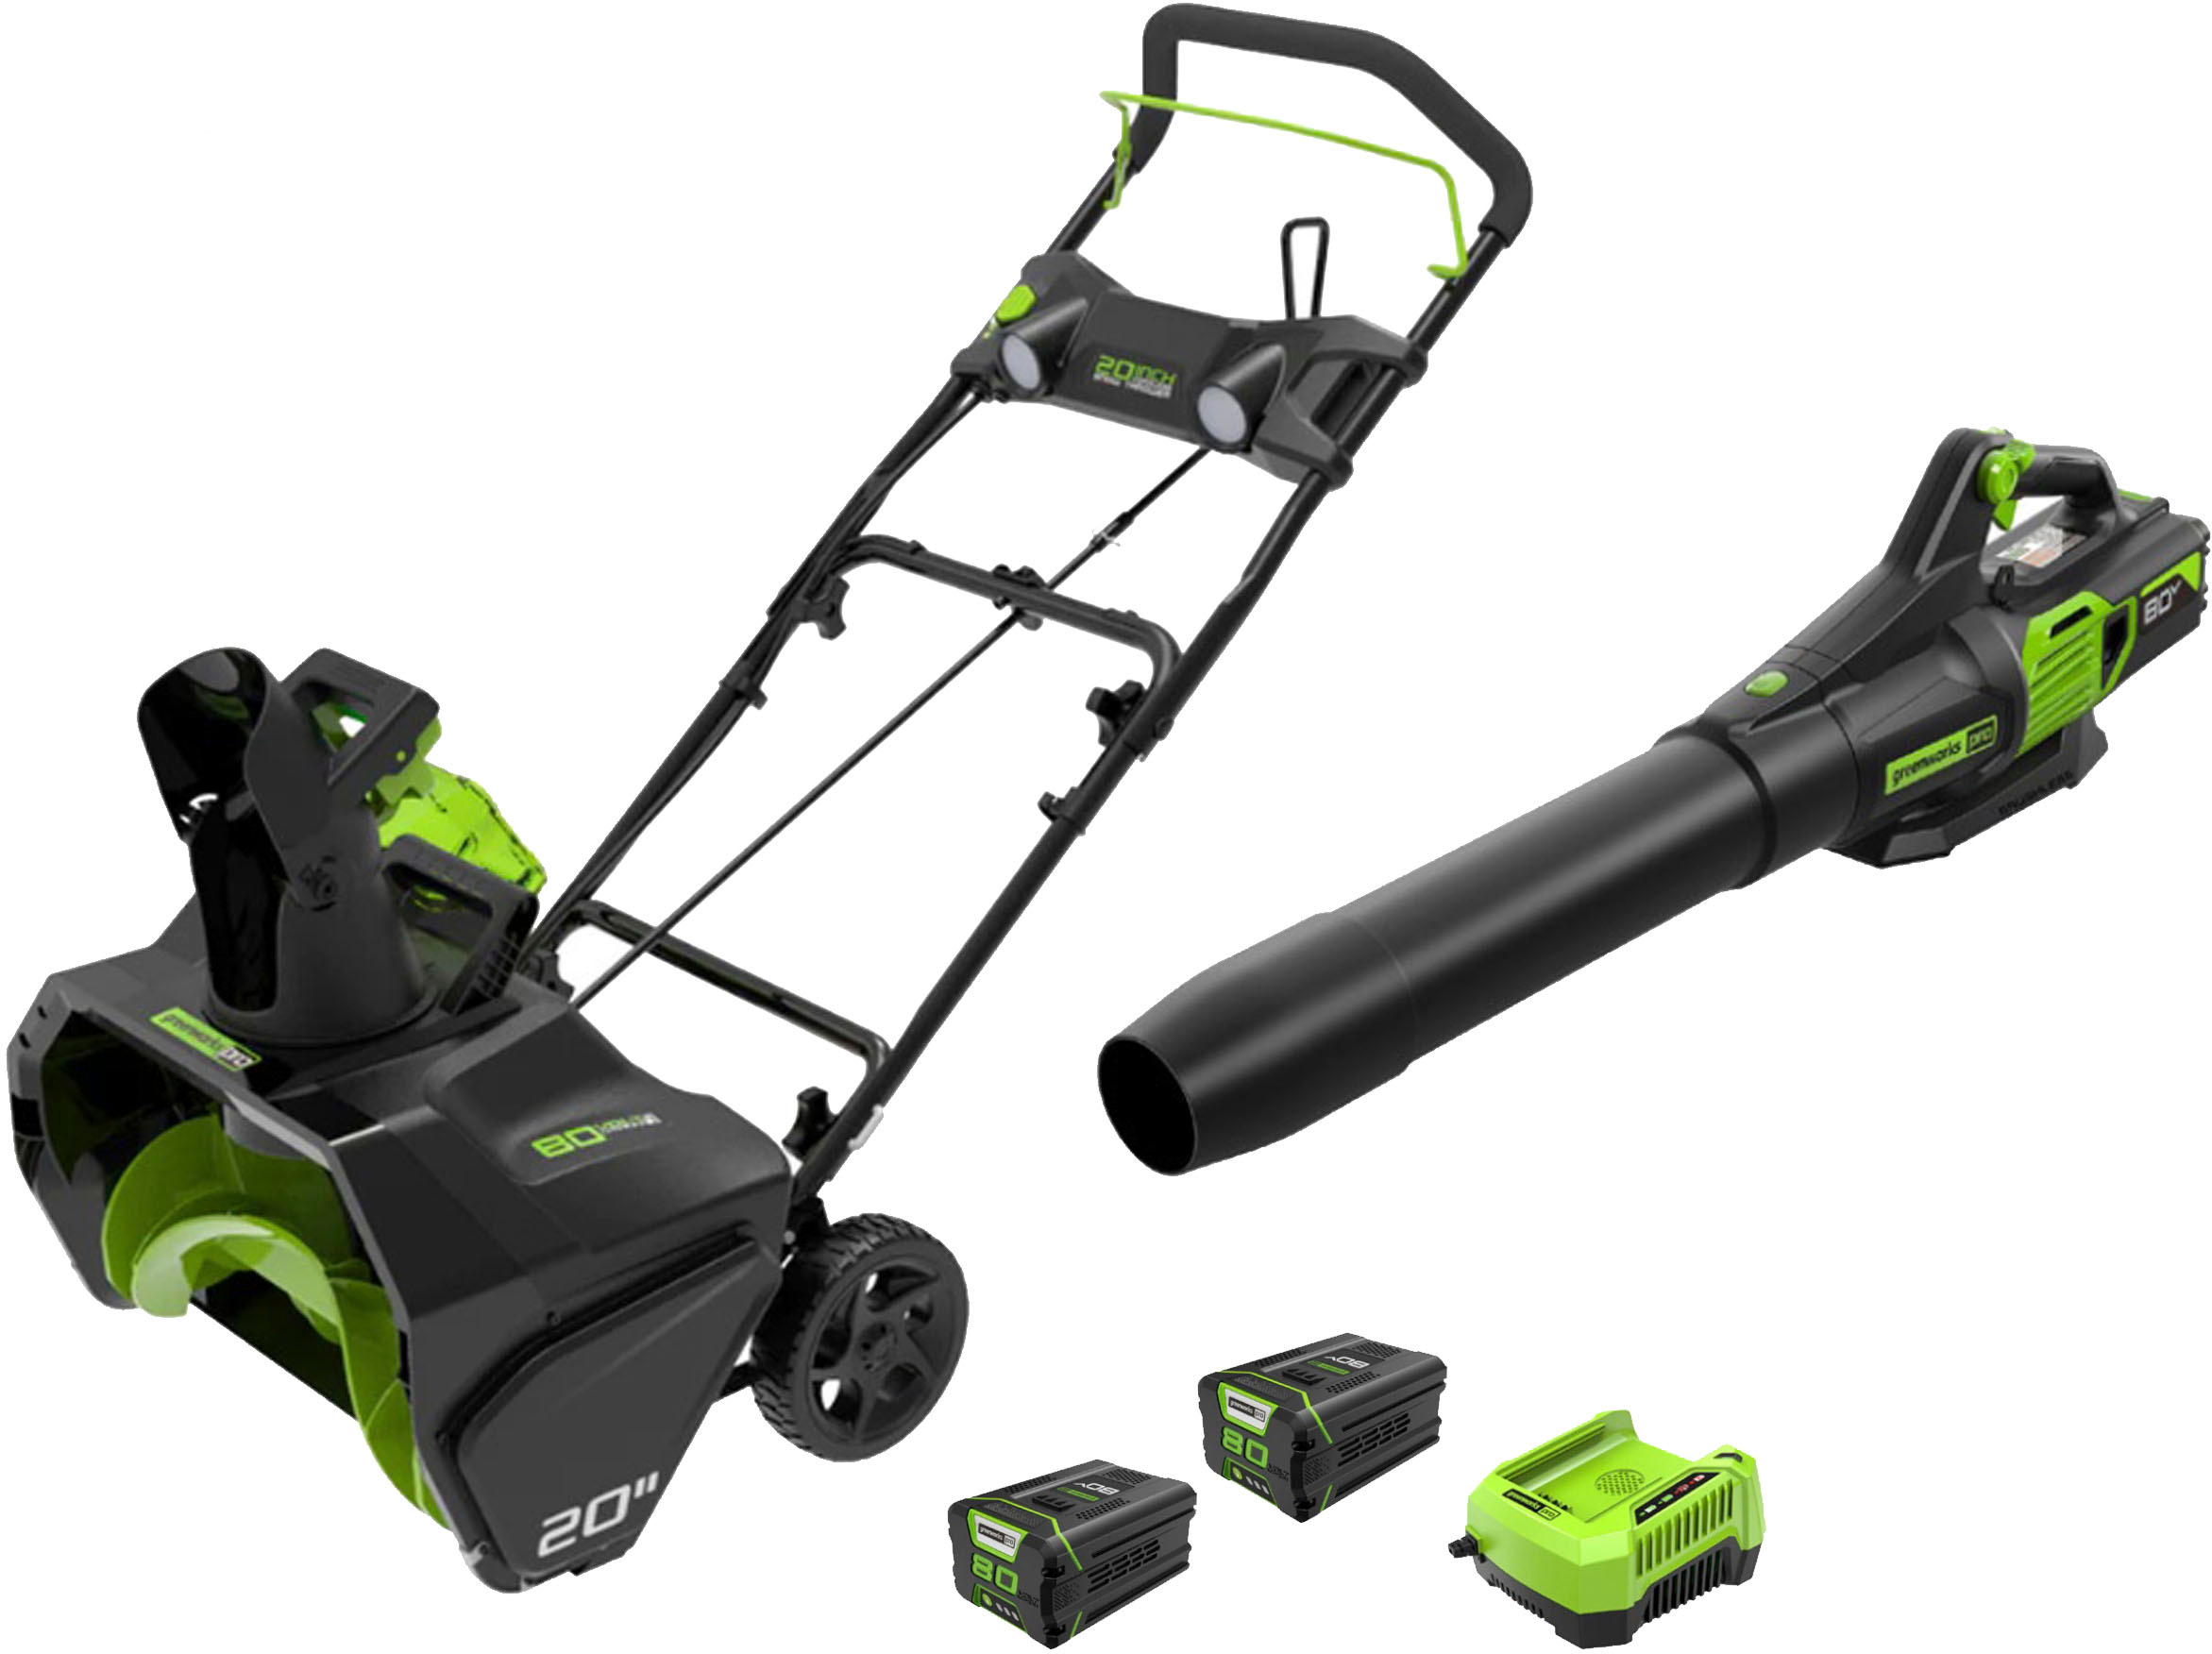 Greenworks 80V Mower With Two 4AH Batteries and Rapid Charger